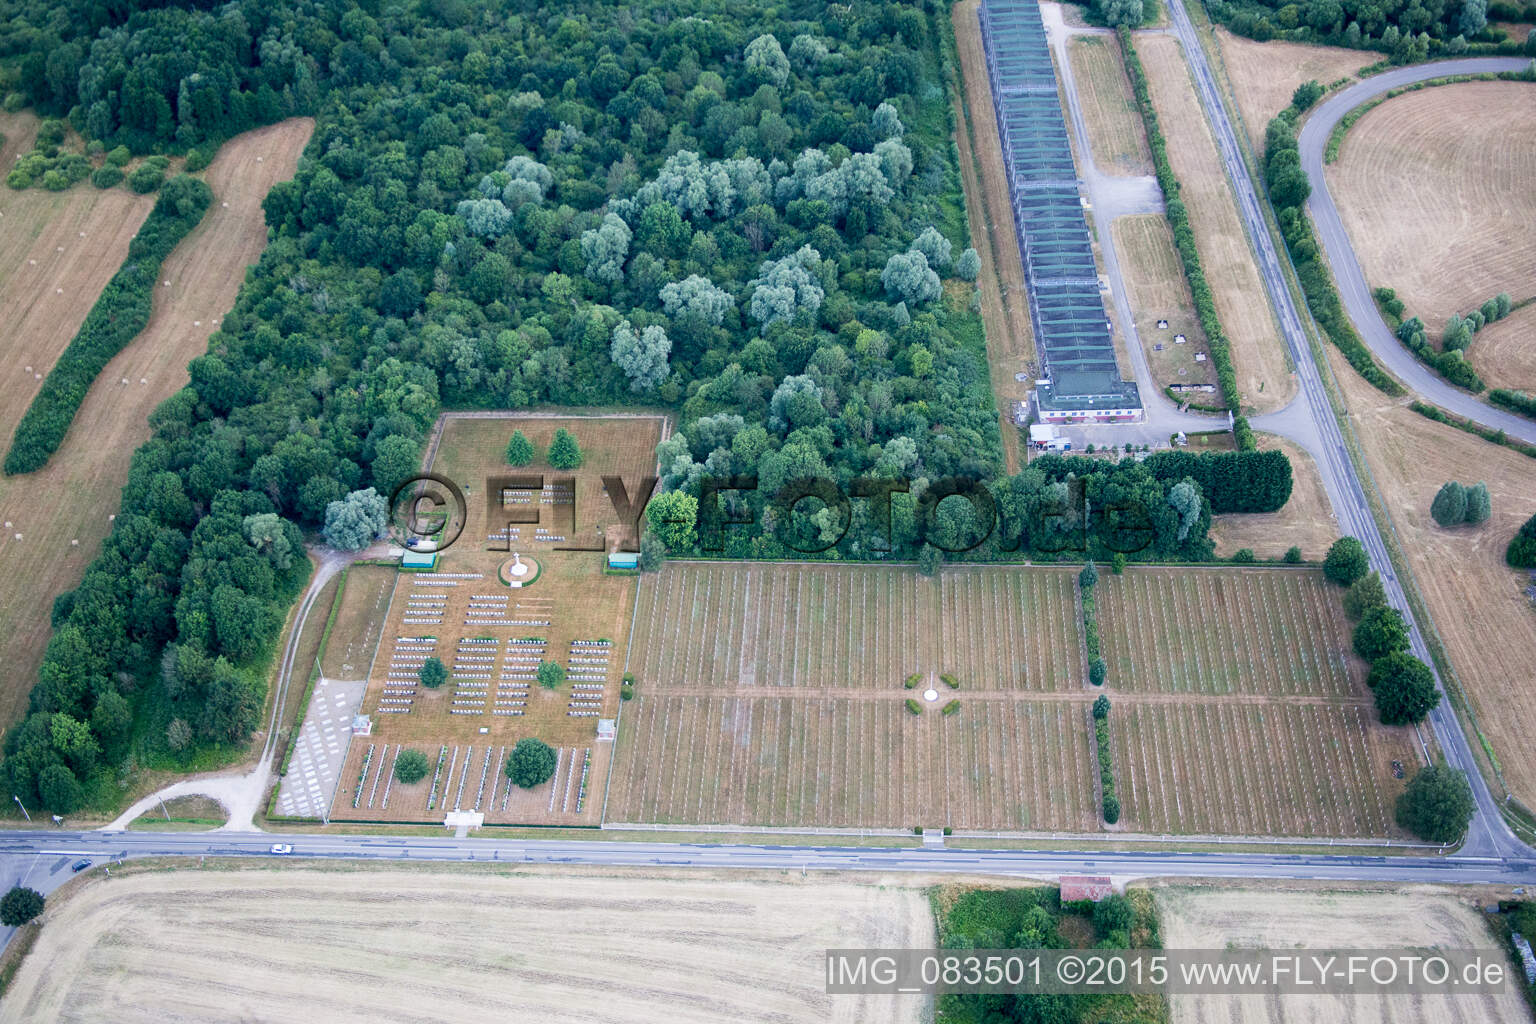 Aerial view of Grave rows on the grounds of the military cemetery of the Royal Canadian Air Force RCAF in Choloy-Menillot in Grand Est, France